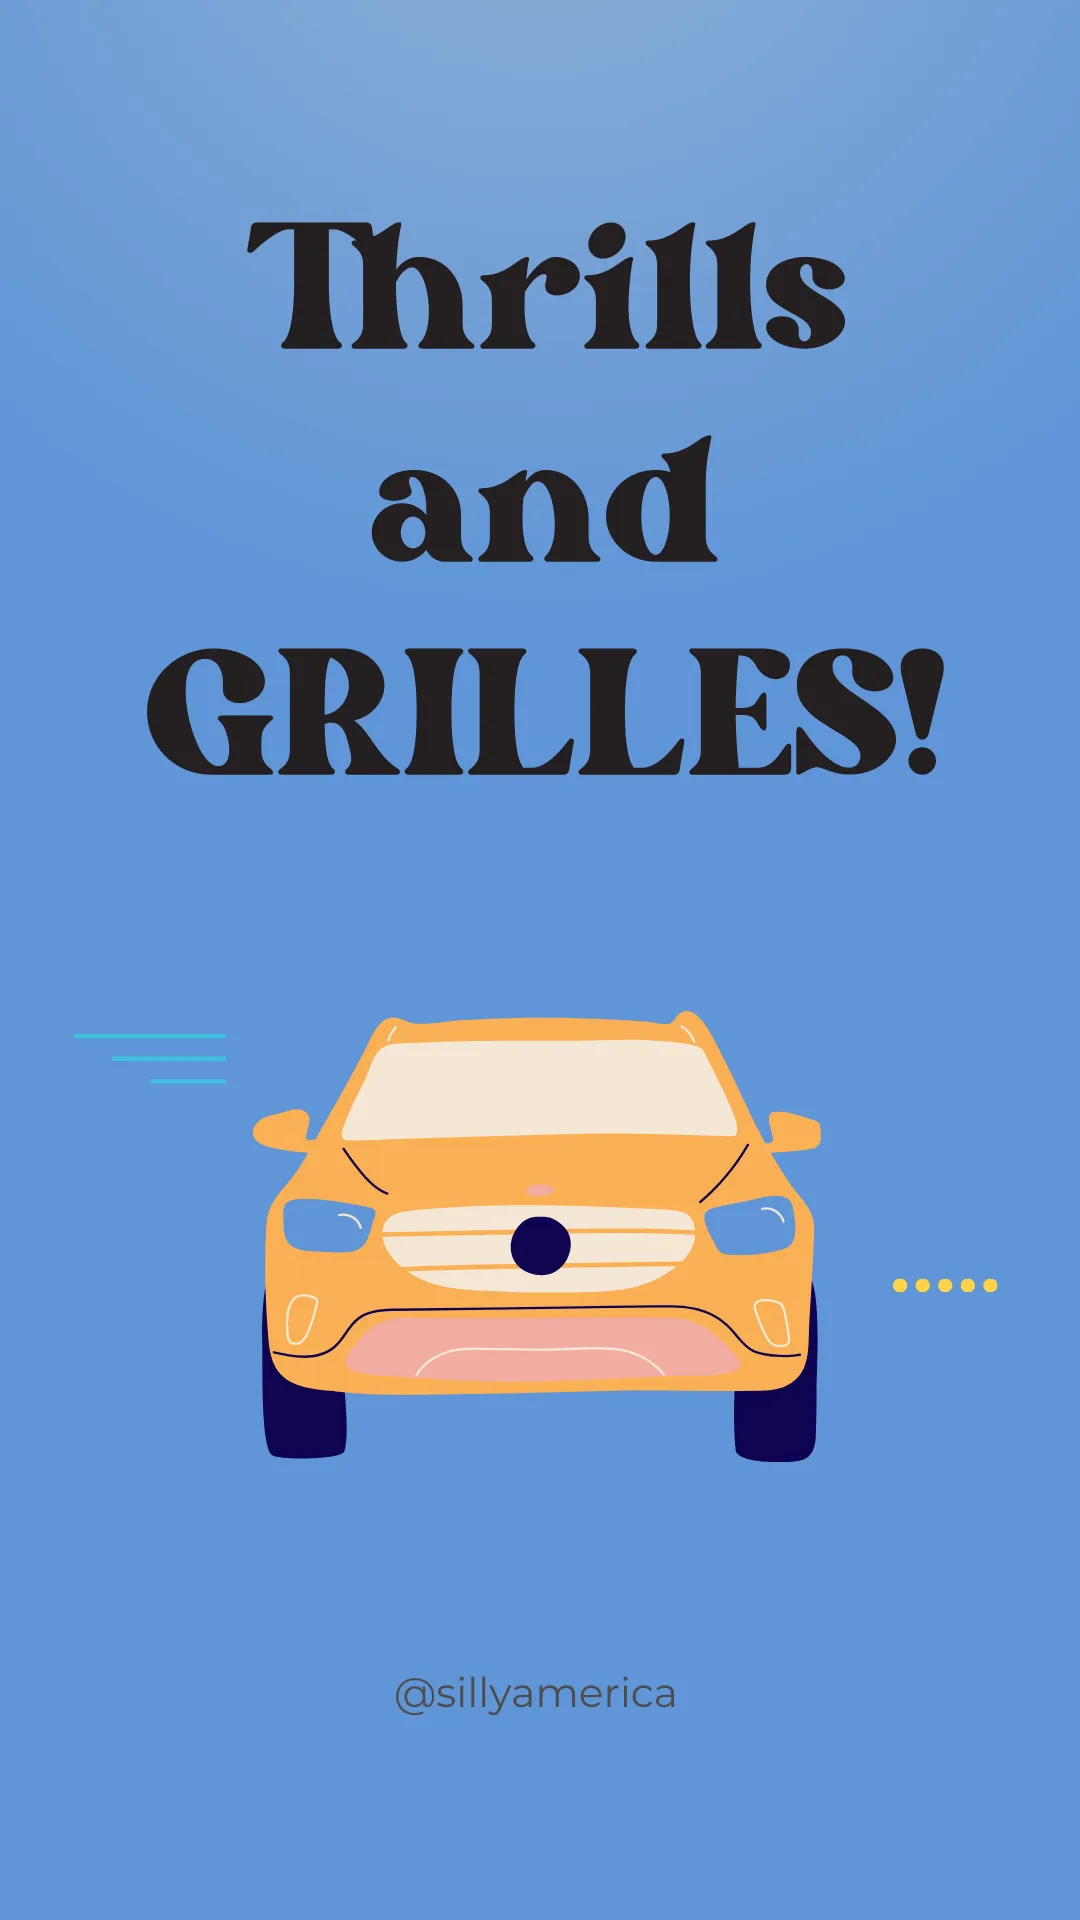 Thrills and GRILLES! - Road Trip Puns